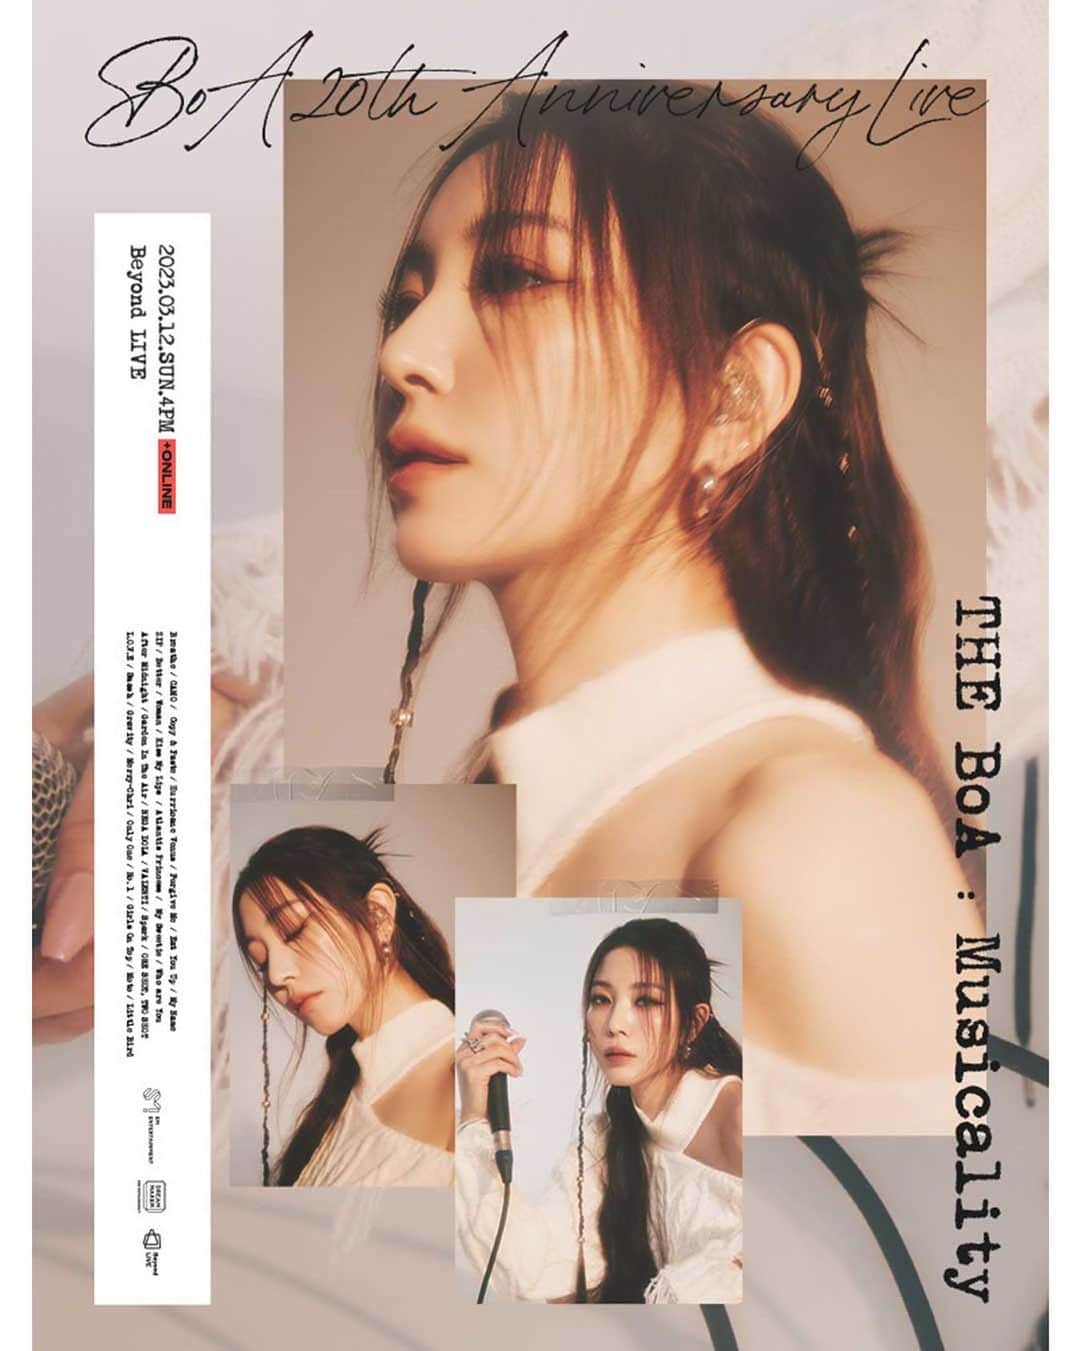 BoAのインスタグラム：「Beyond LIVE - BoA 20th Anniversary Live - THE BoA : Musicality    📆 3/12 SUN 4PM (KST)  👉 Price   KOREA : LIVE ONLY ￦55,000 / LIVE + Re-Streaming ￦62,000  JAPAN : LIVE ONLY 5,500円 / LIVE + Re-Streaming 6,200円  GLOBAL : LIVE ONLY 50 USD / LIVE + Re-Streaming 55 USD  ※You can purchase one ticket per ID    ✅ Beyond LIVE  🔗 http://bit.ly/3lQATmO     🎫 Ticket Sales Period  - 2023년 2월 23일(목) 15:00 (KST) ~ 2023년 3월 12일(일) 17:00 (KST)  - From February 23, 2023 (THU) 15:00 to March 12, 2023 (SUN) 17:00 (KST)    ✅ SMTOWN &STORE   -PC  KO: https://bit.ly/3IjPw9X   EN: https://bit.ly/3kjMj25   JP: https://bit.ly/3kjLfeK   CN: https://bit.ly/3YTkL2z     -MO  KO: https://bit.ly/41feGz9   EN: https://bit.ly/3knaBs3   JP: https://bit.ly/3kk2MDu   CN: https://bit.ly/3EvA6hA     🎫 Ticket Sales Period  - 2023년 2월 23일(목) 15:00 (KST) ~ 2023년 3월 12일(일) 16:00 (KST)  - From February 23, 2023 (THU) 15:00 to March 12, 2023 (SUN) 16:00 (KST)    #BoA #THE_BoA #보아  #20th_Anniversary_Live   #BeyondLIVE #비욘드라이브   #Beoynd_LIVE_Musicality」